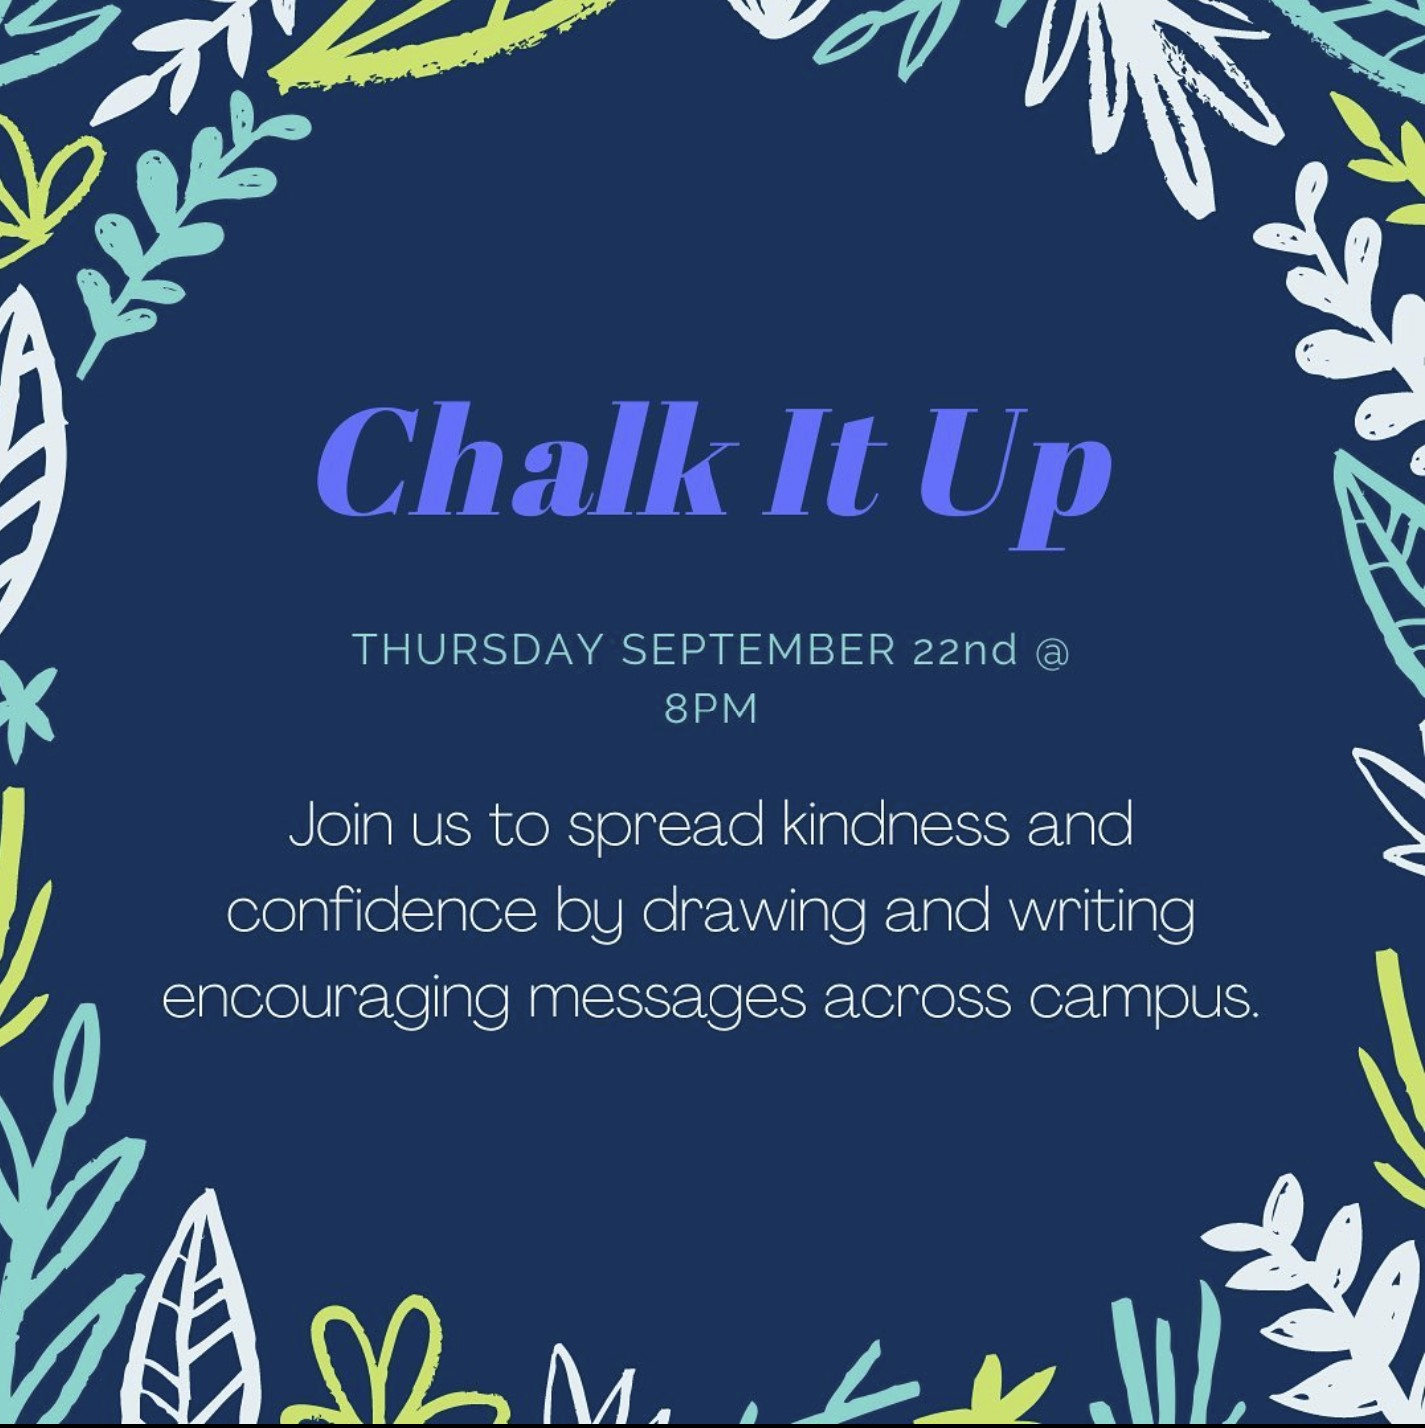 Image describing the details of the Chalk It Up event with a flower border.